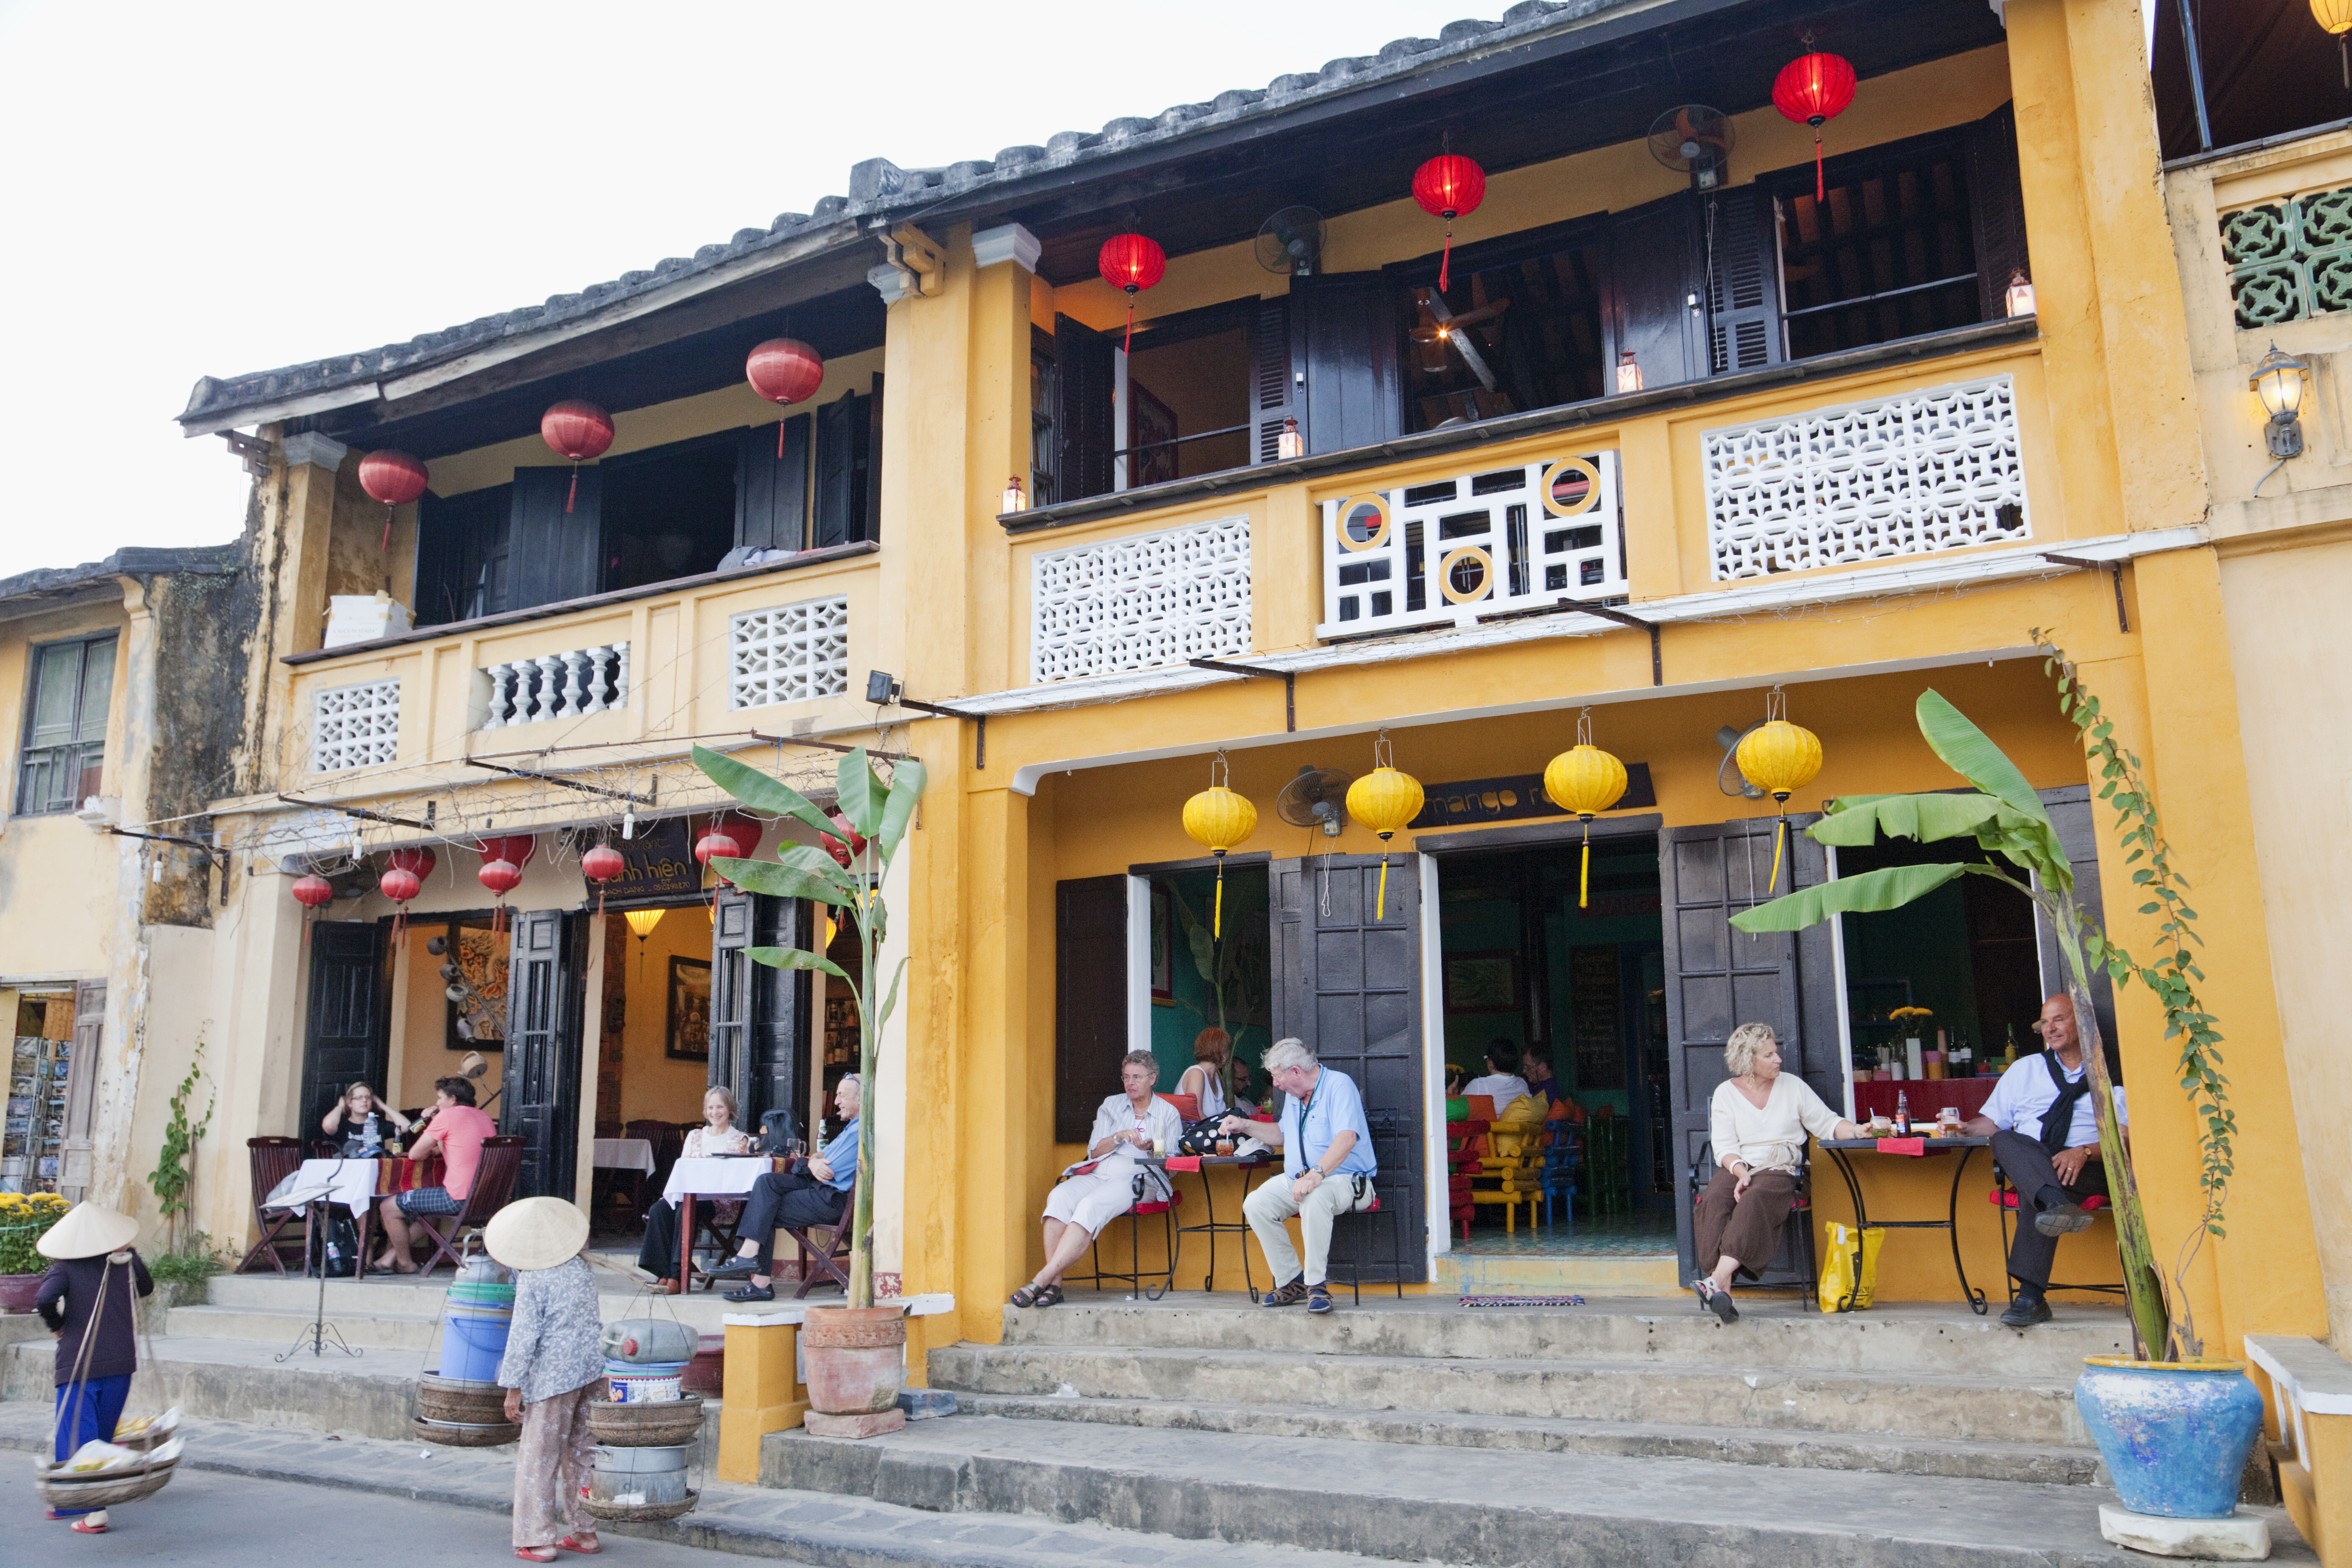 Waterfront cafes in the Old Town, Hoi An, Vietnam, Indochina, Southeast Asia, Asia